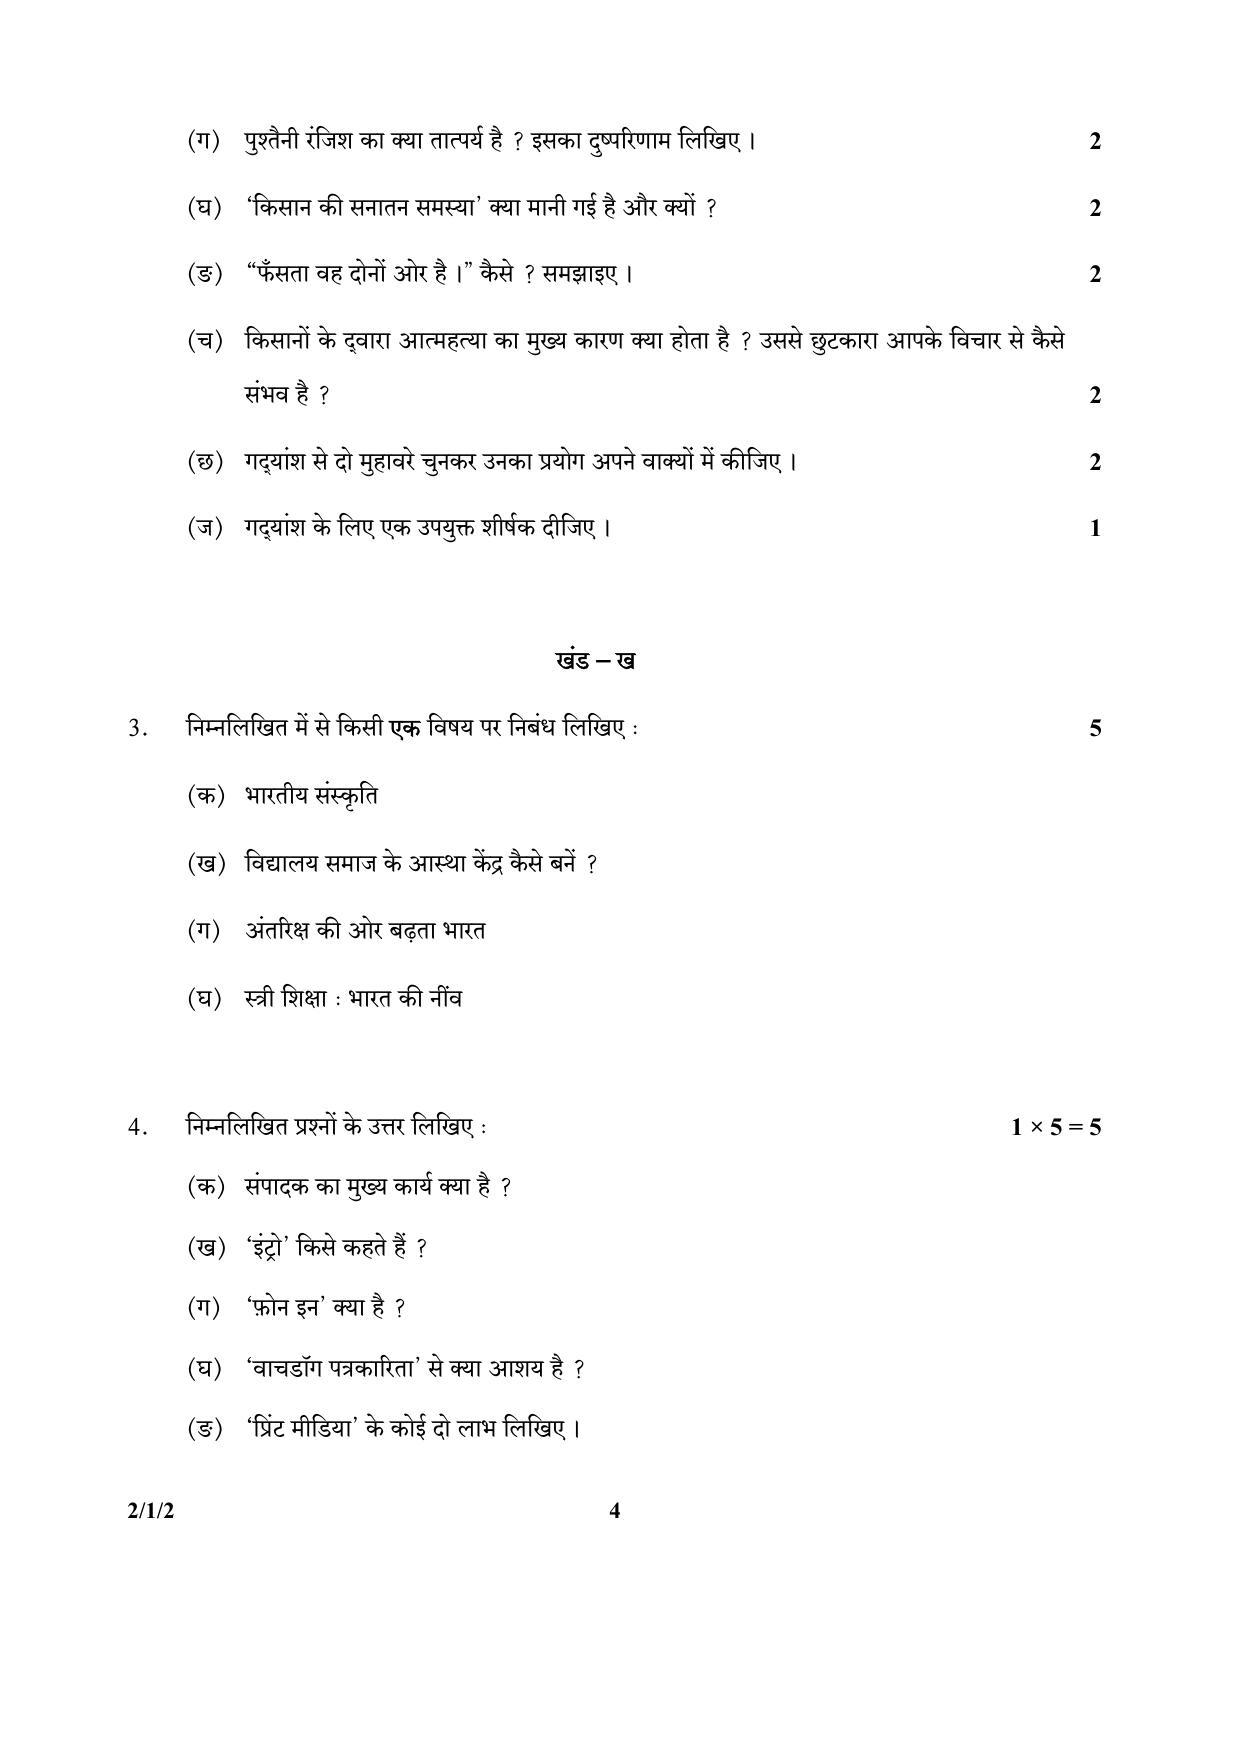 CBSE Class 12 2-1-2 (Hindi) 2017-comptt Question Paper - Page 4